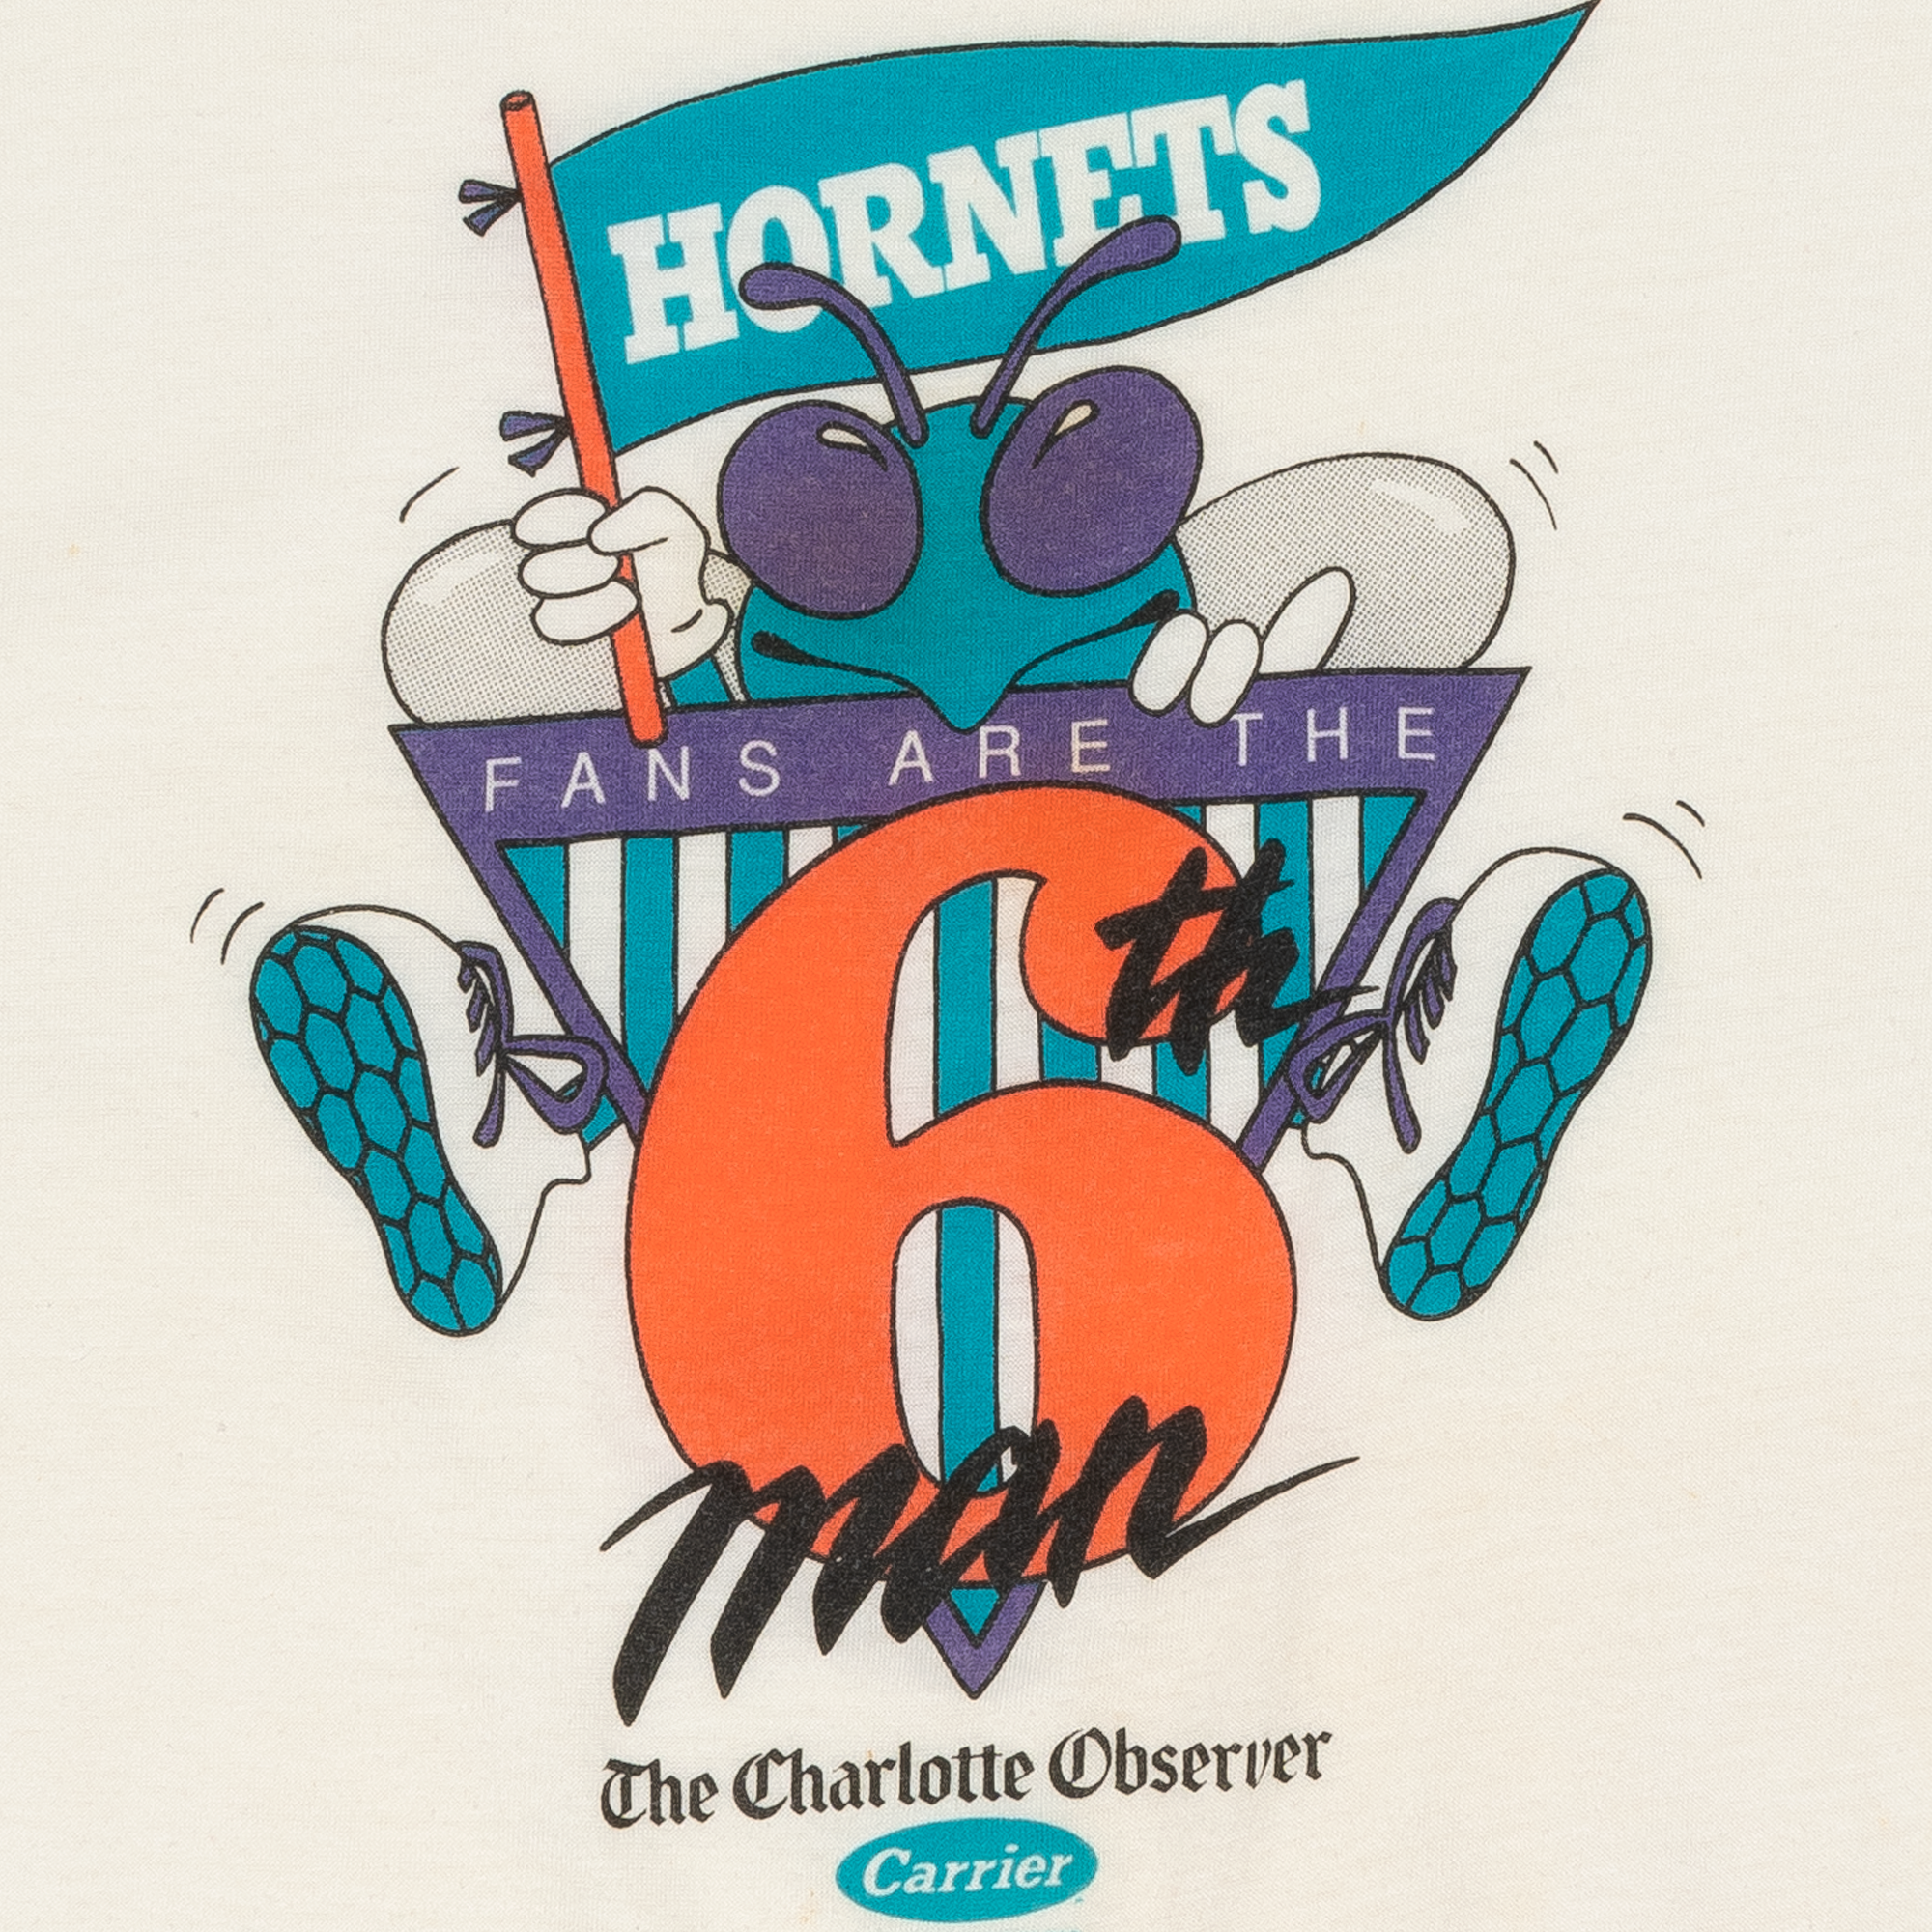 Charlotte Hornets Fans Are The 6th Man 1990s Advertising Tee White-PLUS